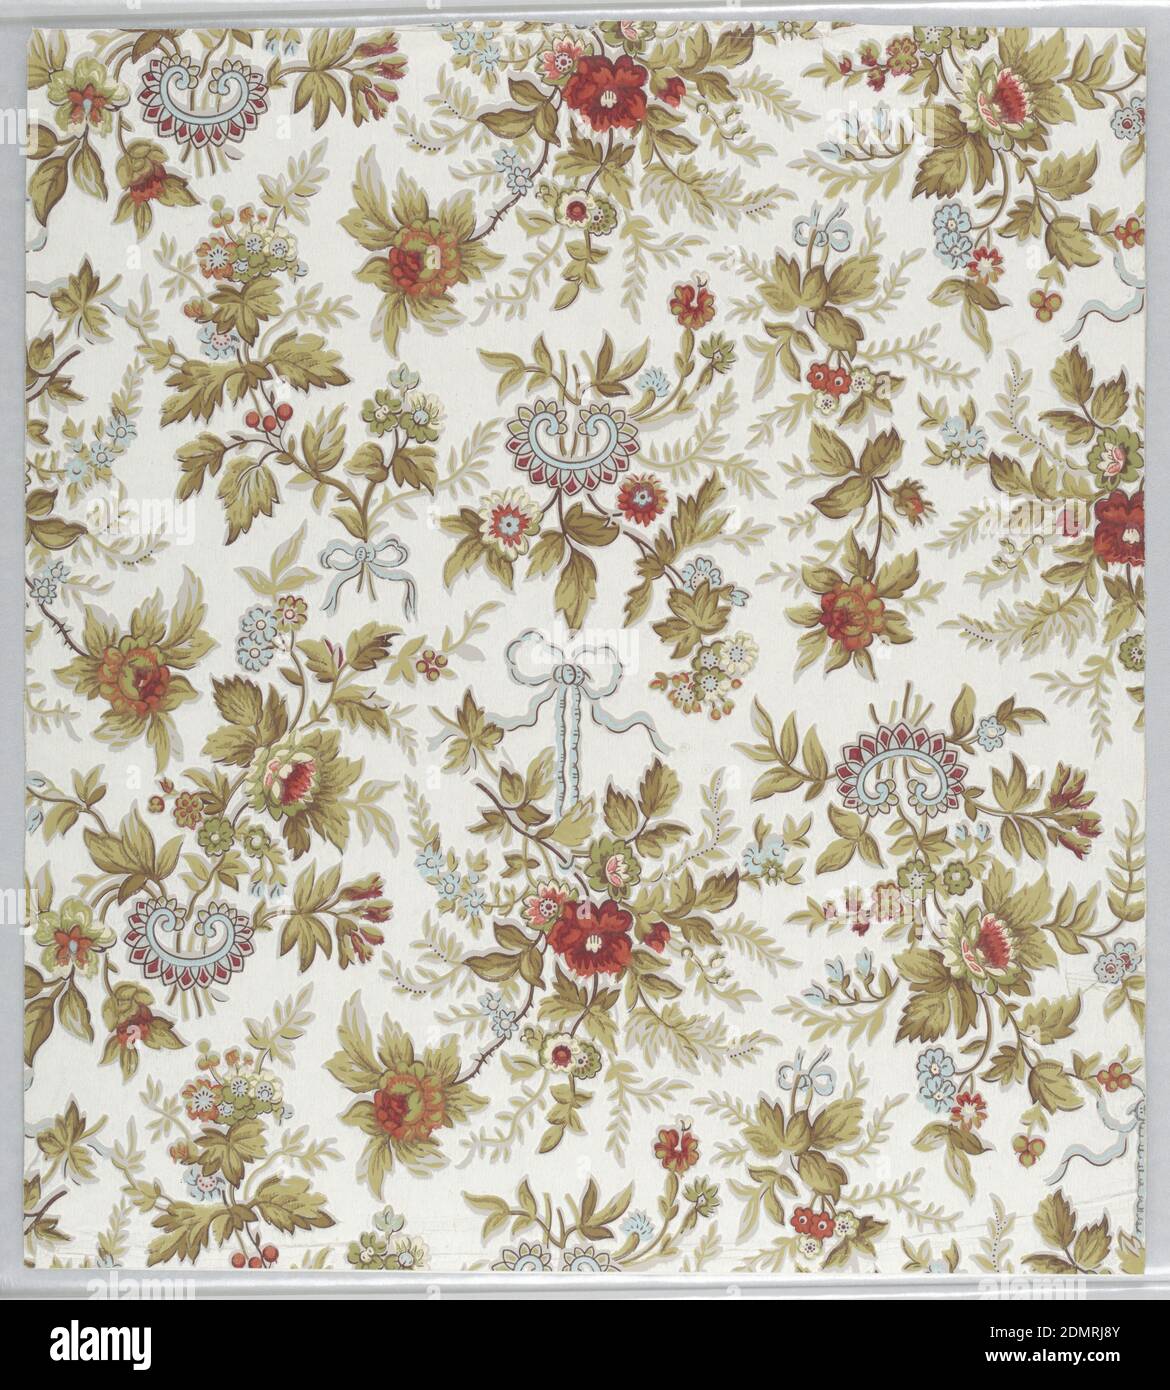 Sidewall, Machine-printed paper, Aesthetic style design. Neo-Rococo pattern with five motifs of bunches of flowers arranged jigsaw-like; bunches alternatively tied at their base by ribbons with bow knots, hanging from a looped ribbon, or sprouting from an odd, chinoiserie horseshoe-shaped jewelry-like form; flow of growth is both upward and downward; naturalistic coloring and shading with light blue, red, and cream predominantly used on the flowers, light blue on the ribbons, and light blue, red, and tan on the jewelry forms; white ground., USA, ca. 1880, Wallcoverings, Sidewall Stock Photo